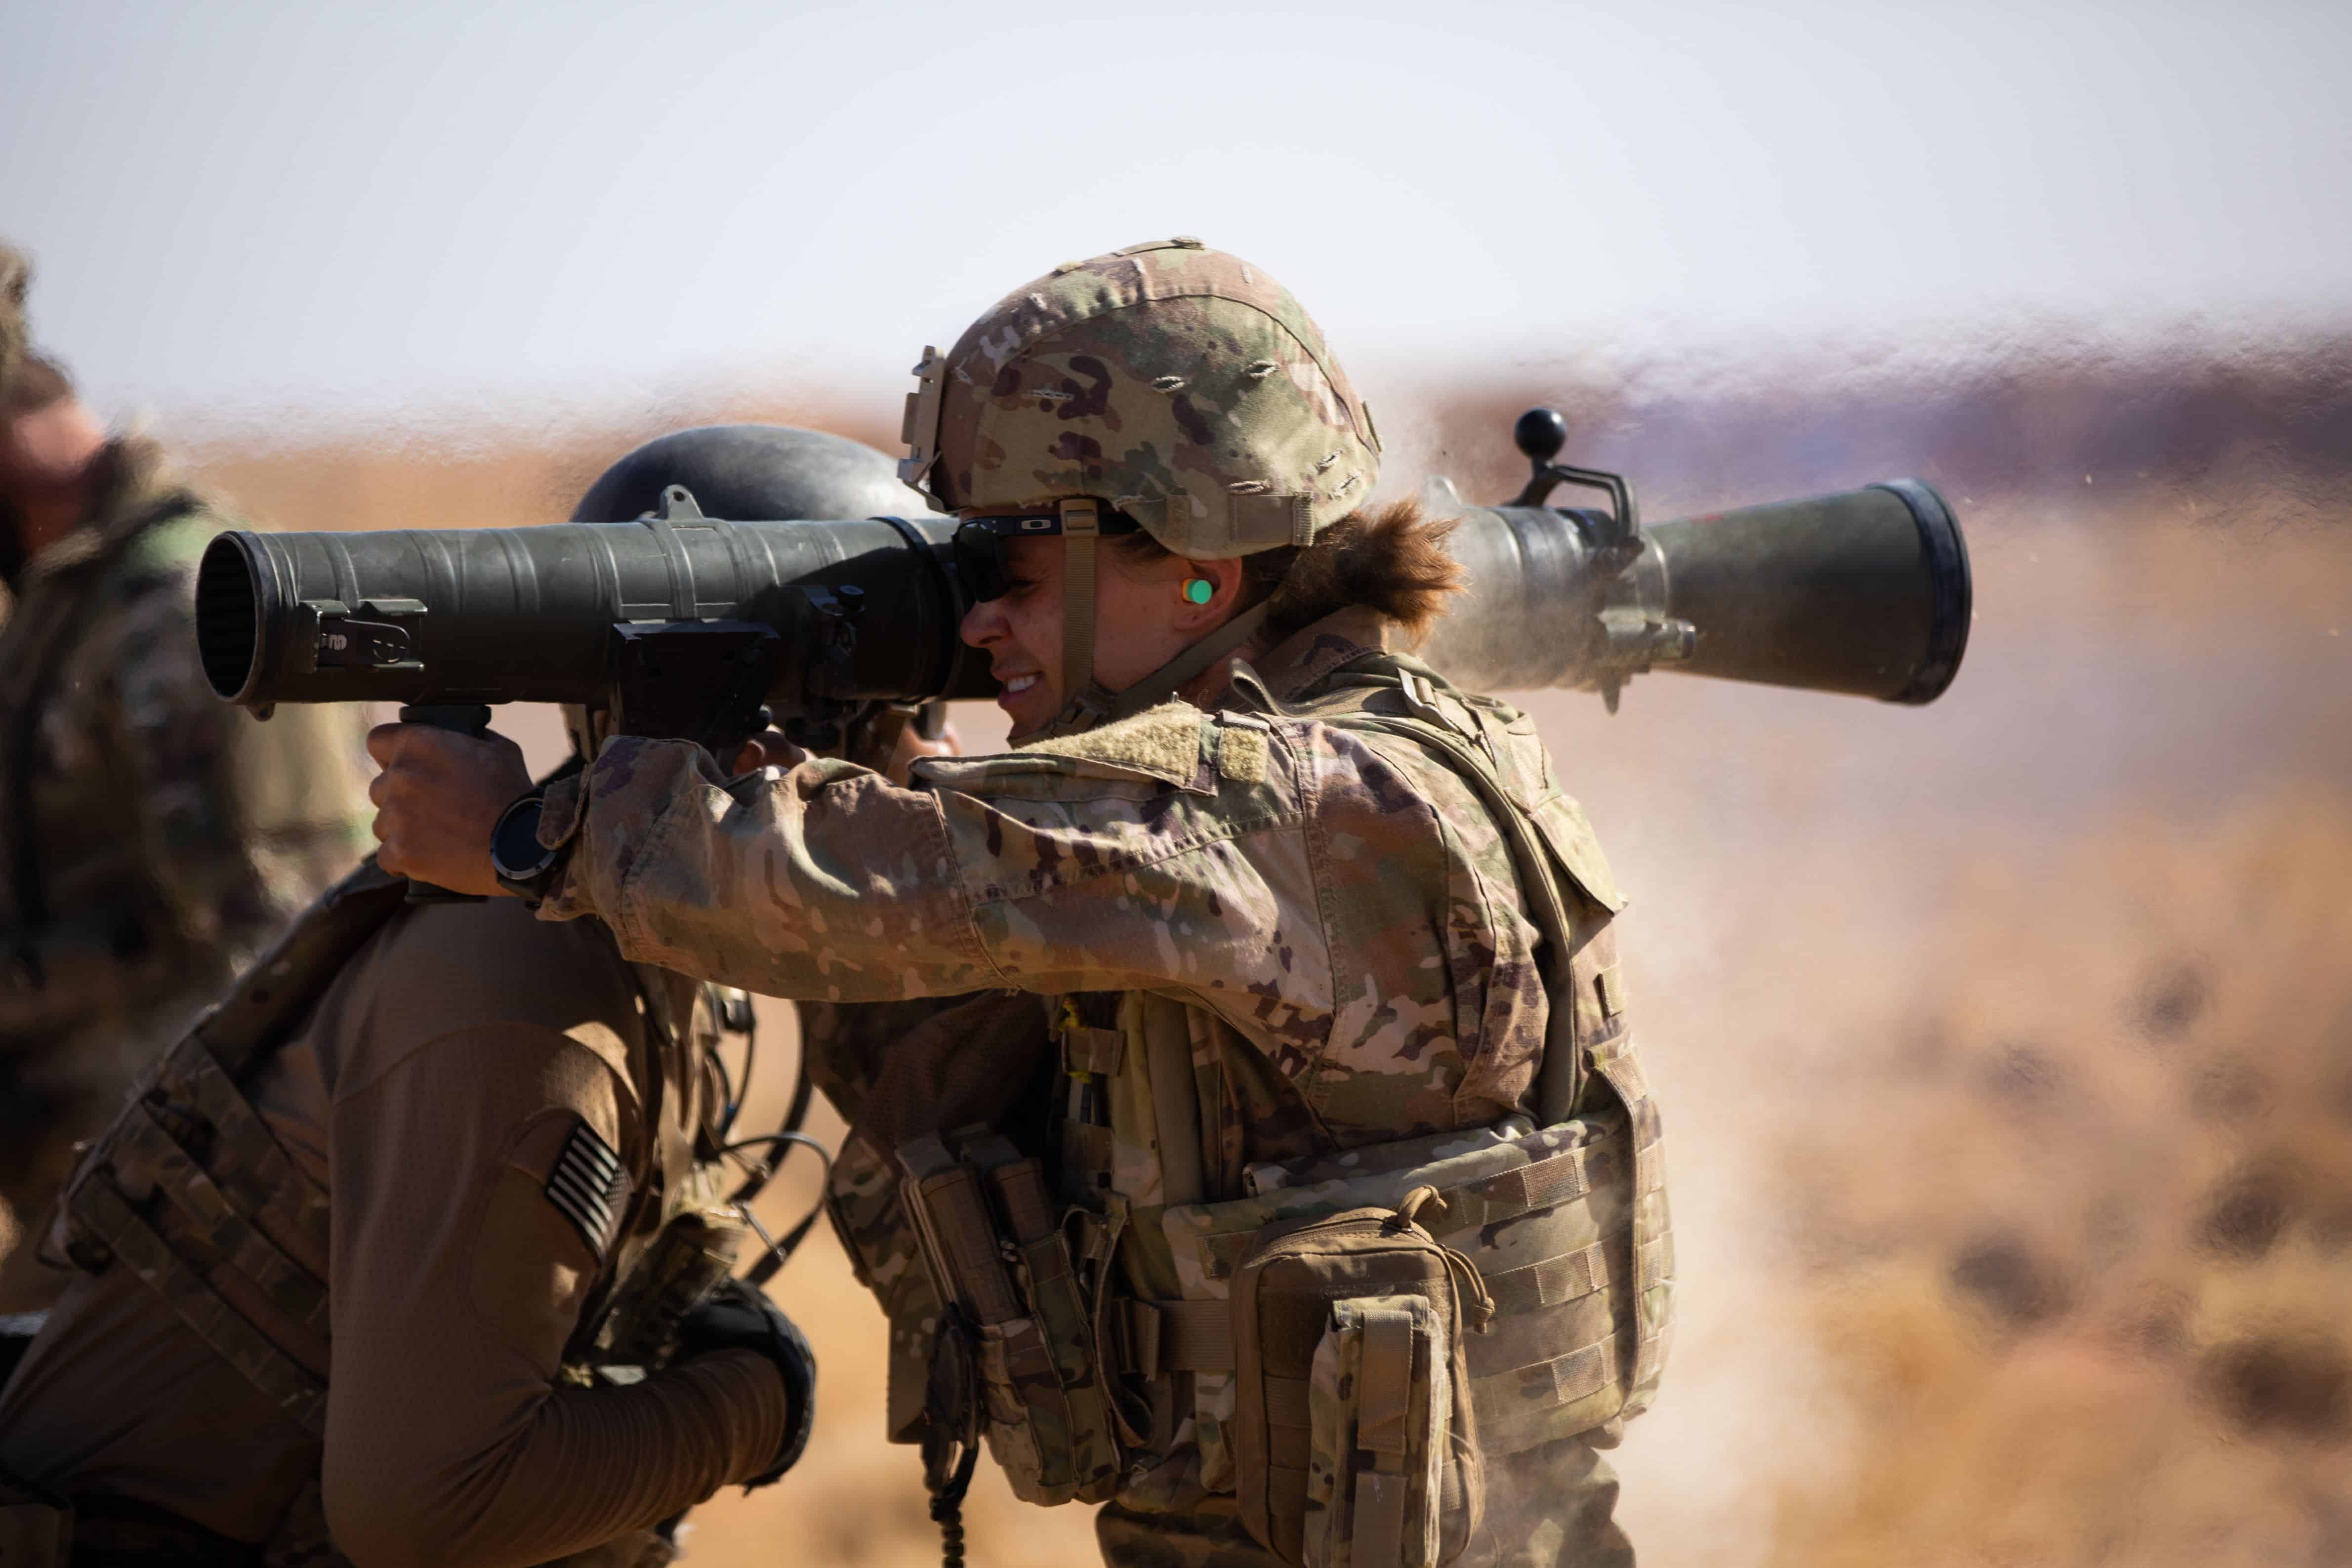 A soldier deployed to At-Tanf Garrison, Syria, fires an M3 Carl Gustaf Recoilless Rifle during a familiarization range hosted by Special Forces July 19, 2020. The Conventional and SOF relationship at the ATG helps enable the US's ability to bring stability to the region, and deters Daesh enemies from entering the 55km area. (US Army Photo by Spc. Chris Estrada)